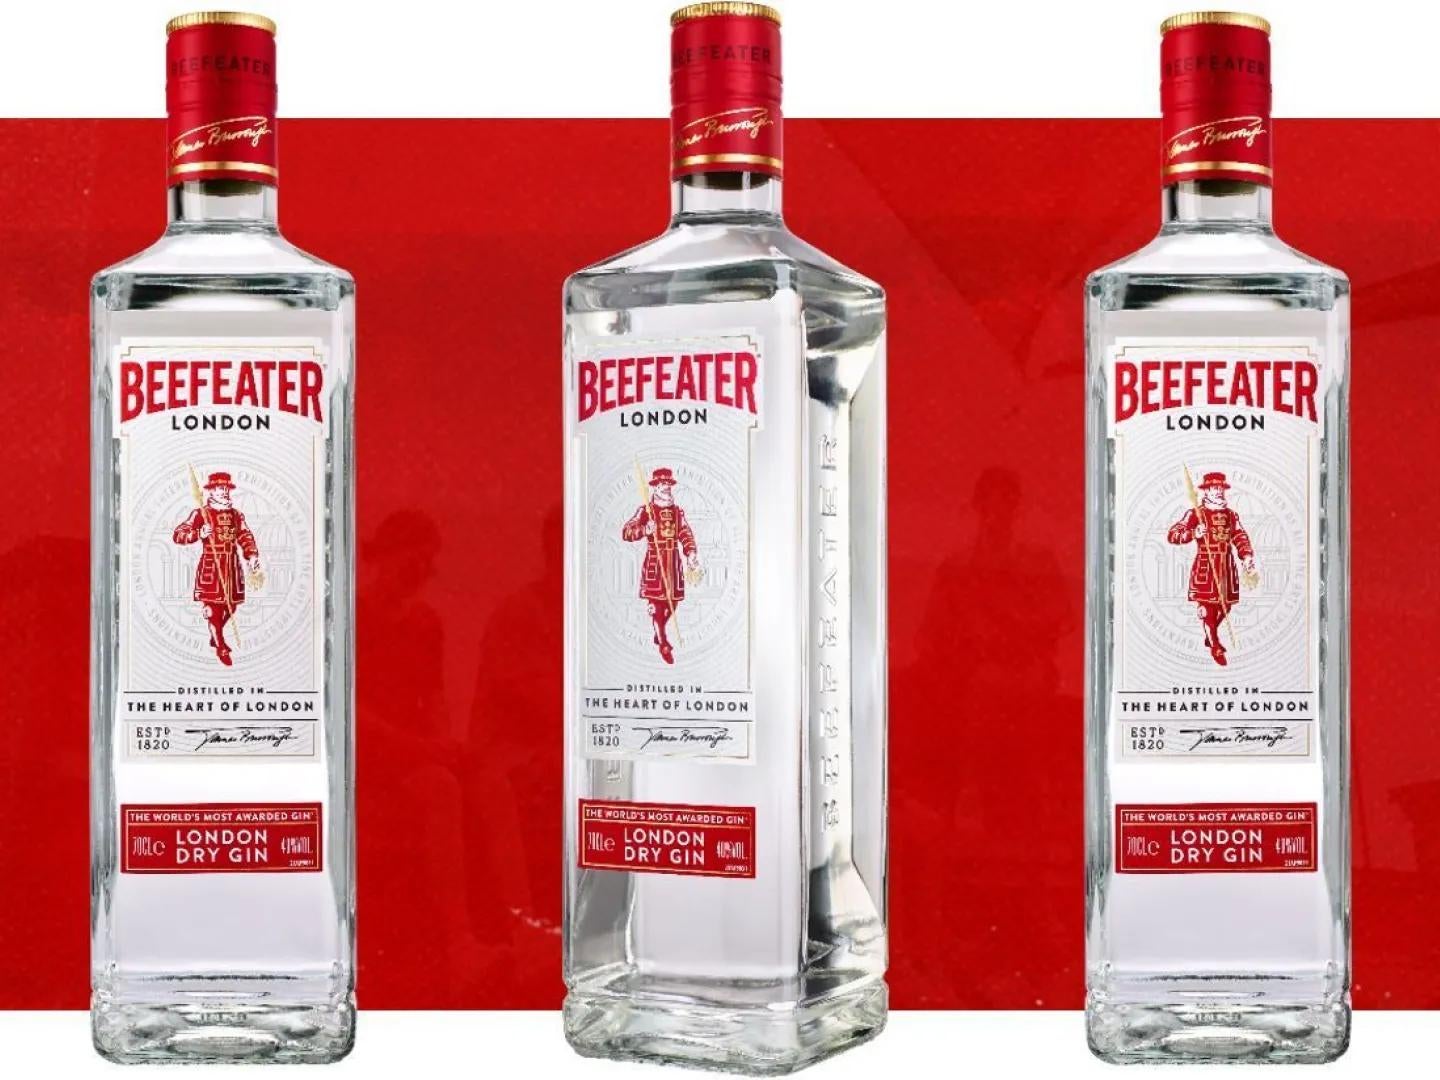 Beefeater's new packaging